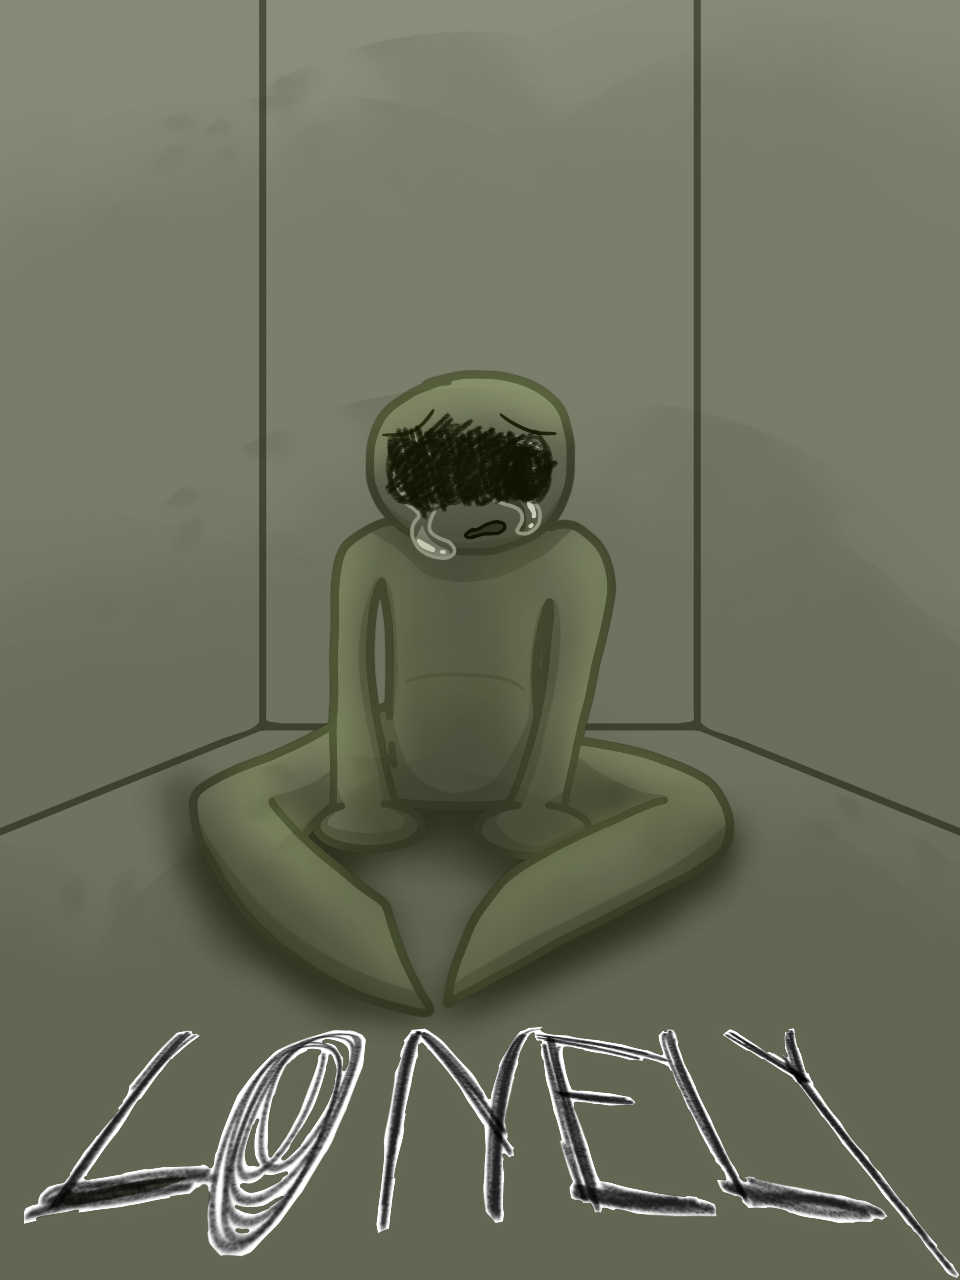 An image of a figure sitting in a blank closed-wall room with the word "Lonely" written out in print below the figure sitting